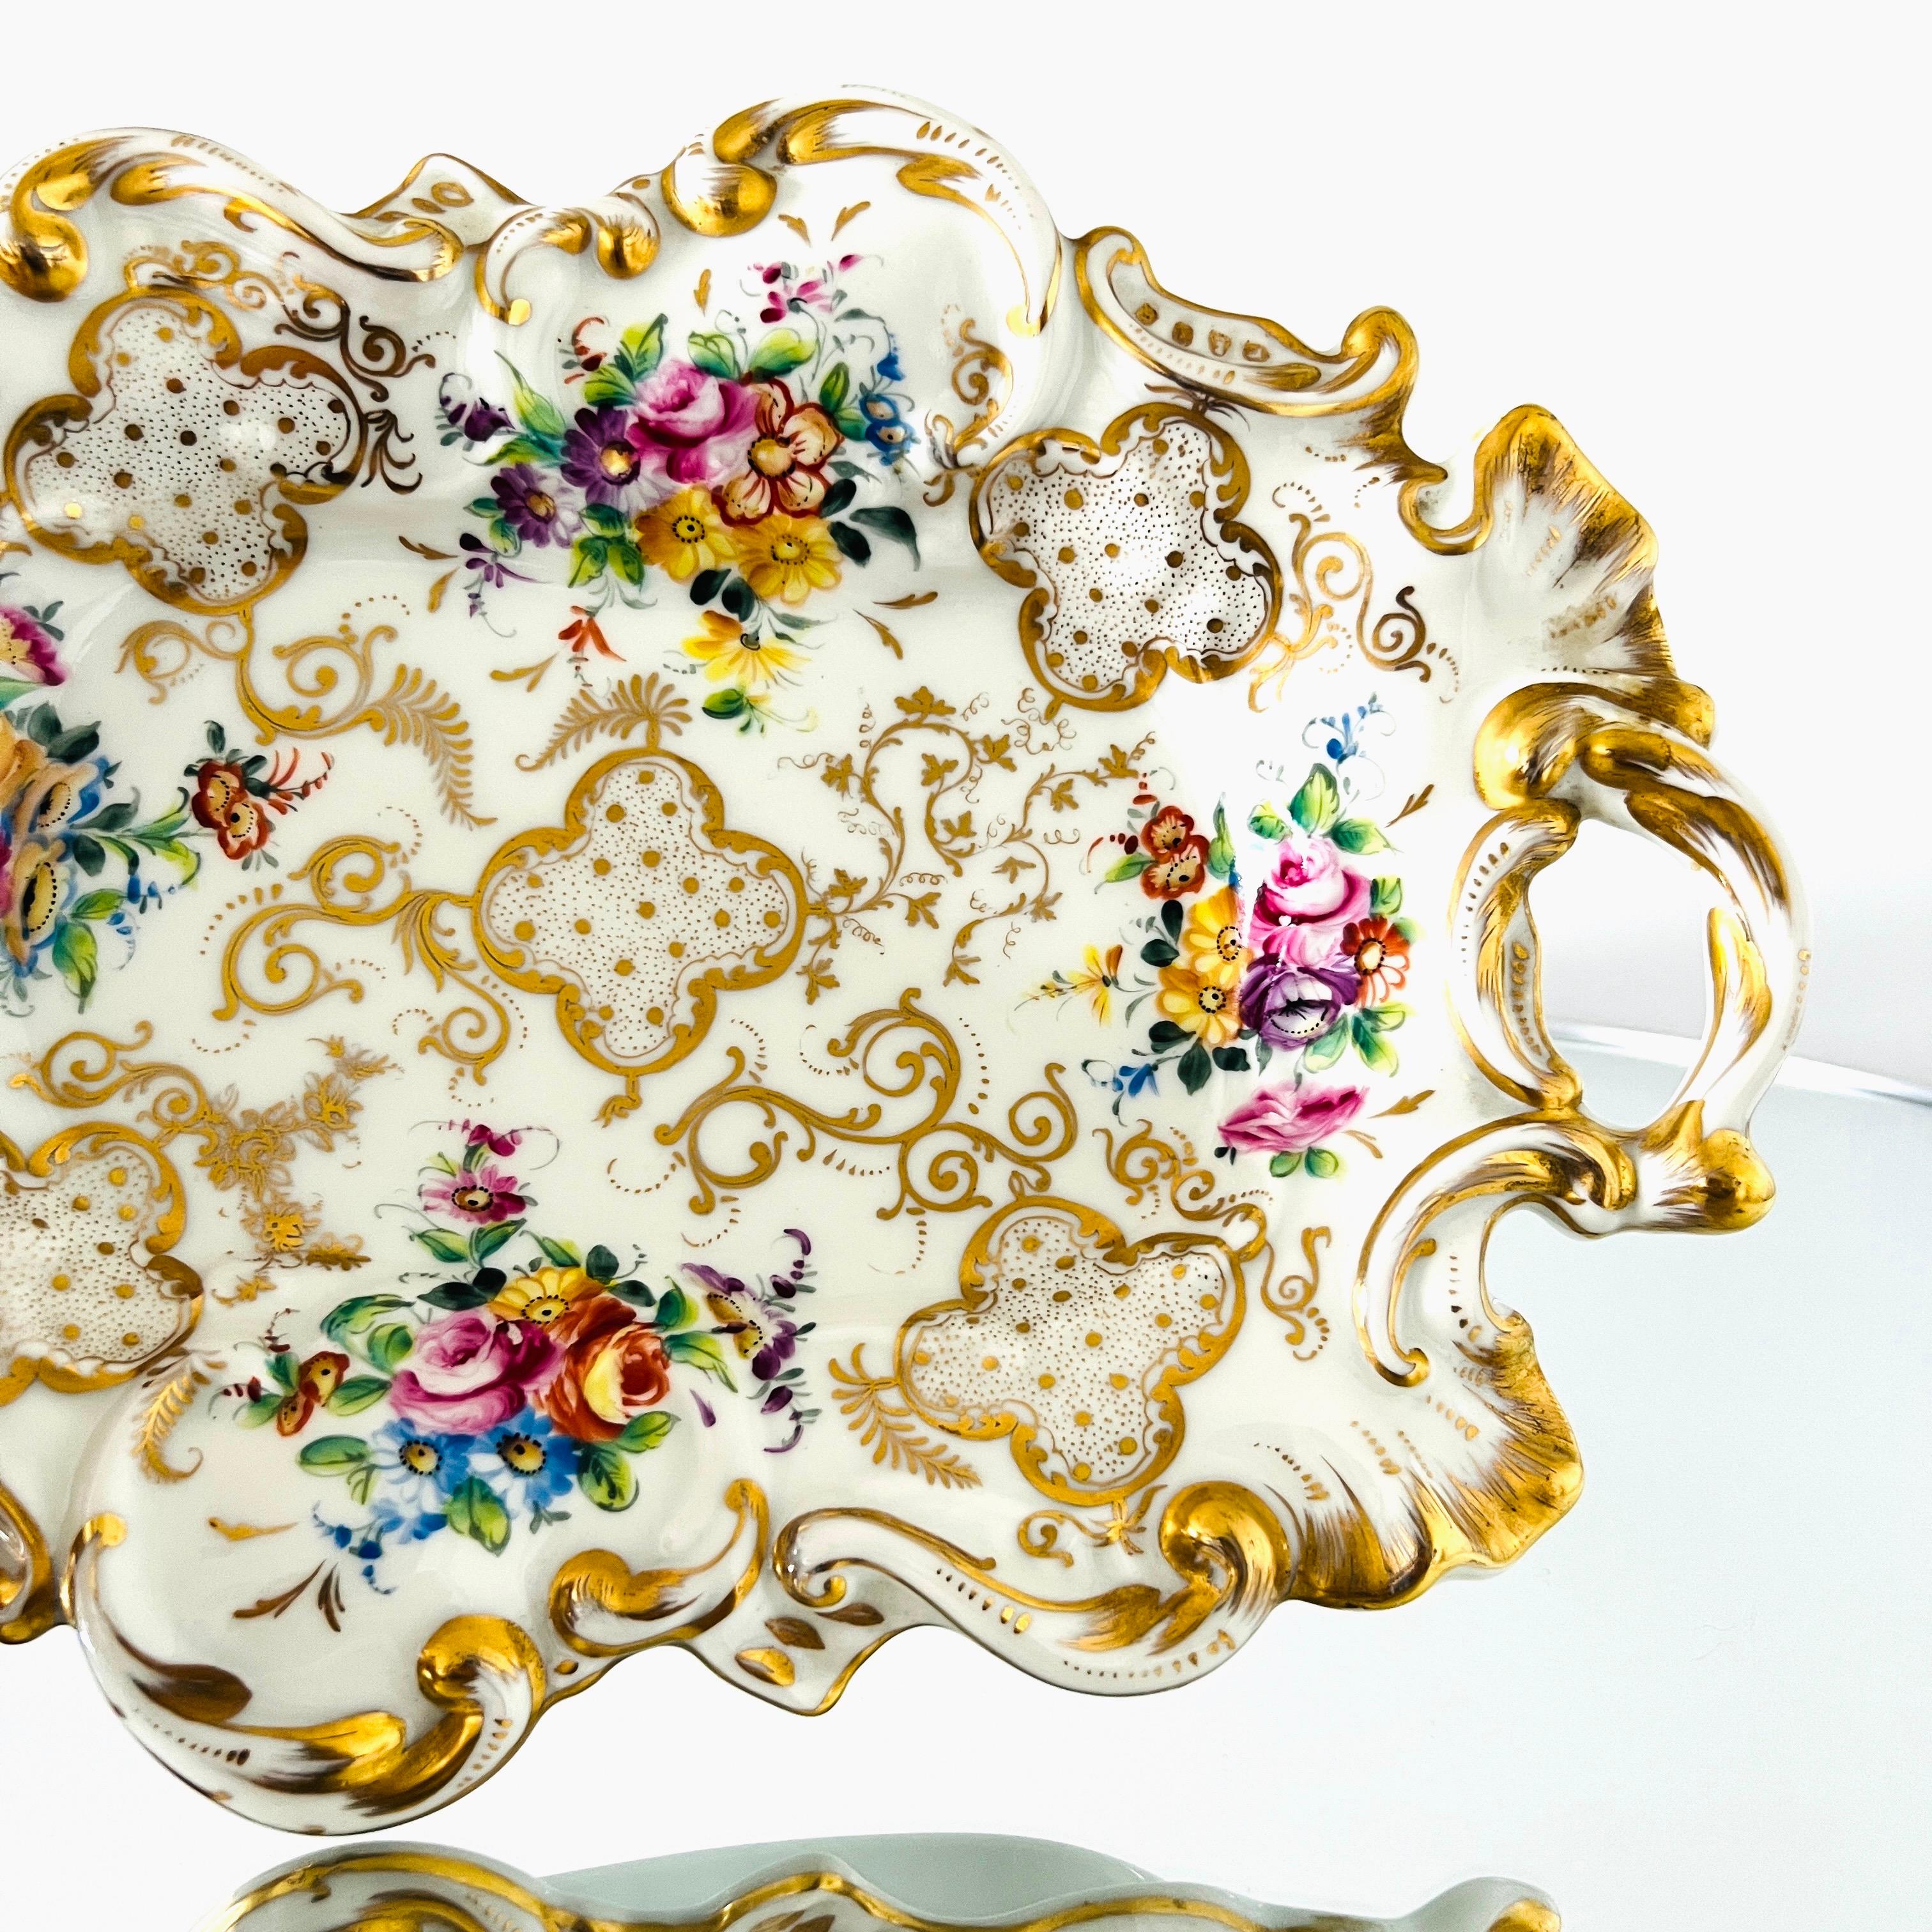 Le Tallec Hand Painted Gold and Floral Rococo Porcelain Platter or Tray In Good Condition For Sale In Fort Lauderdale, FL